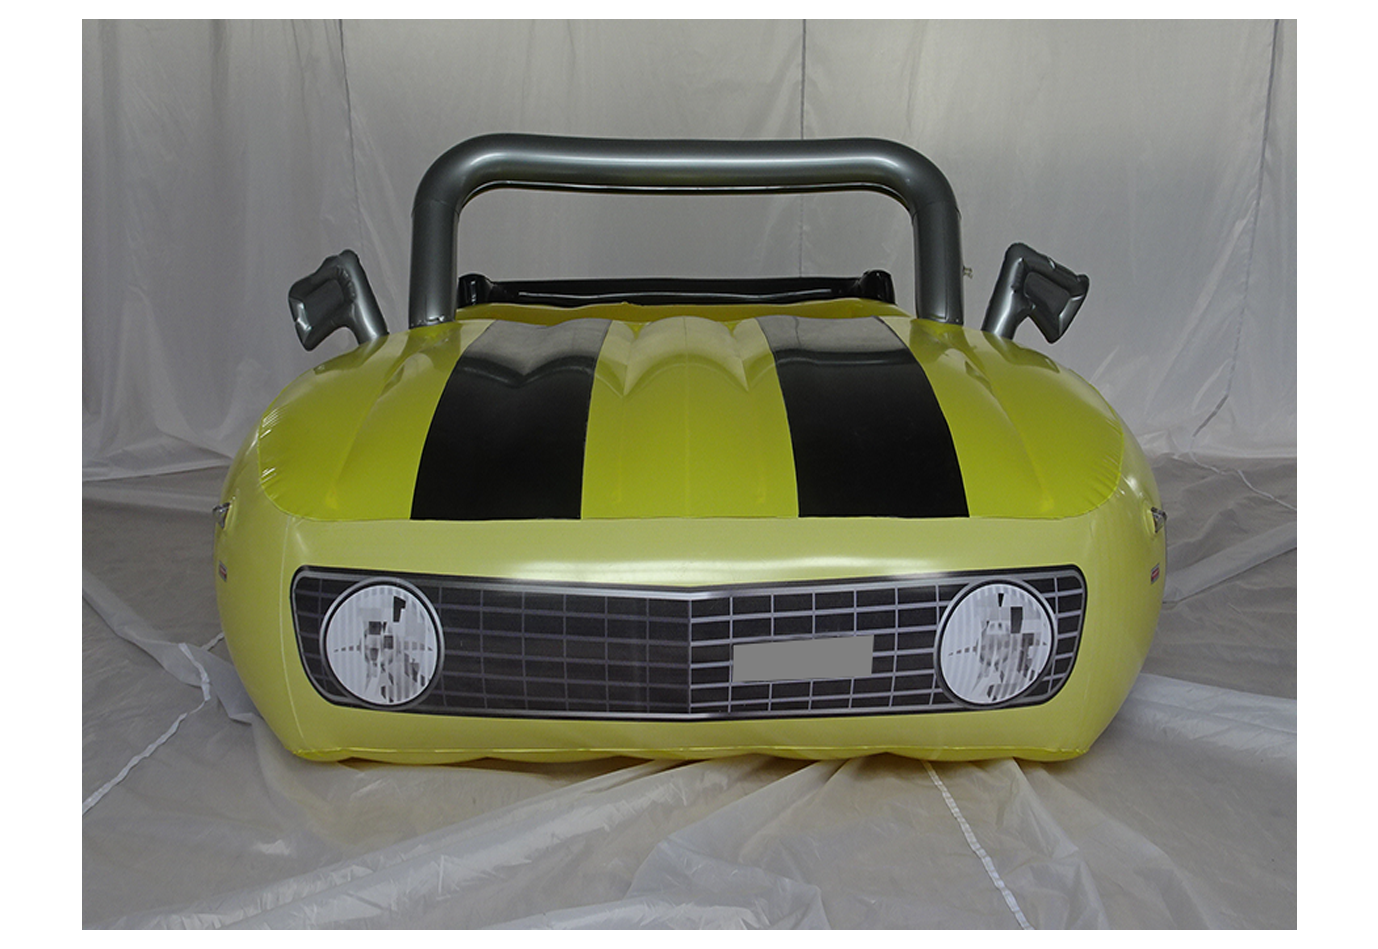 High quality customised inflatable sport car float